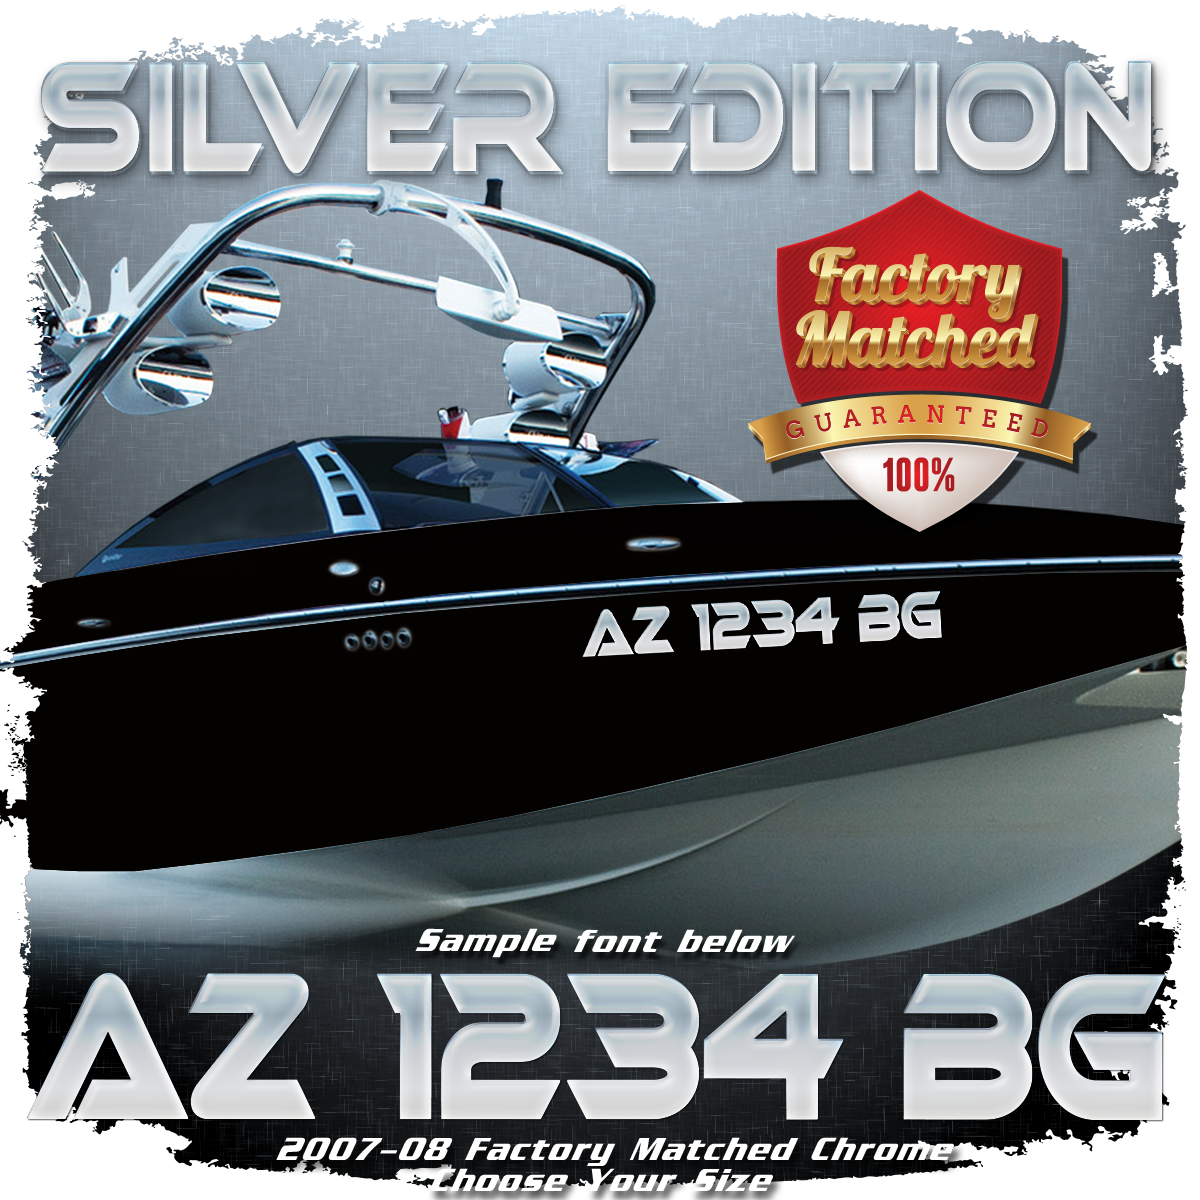 Malibu Silver Edition Registration, Factory Matched Chrome (2 included)